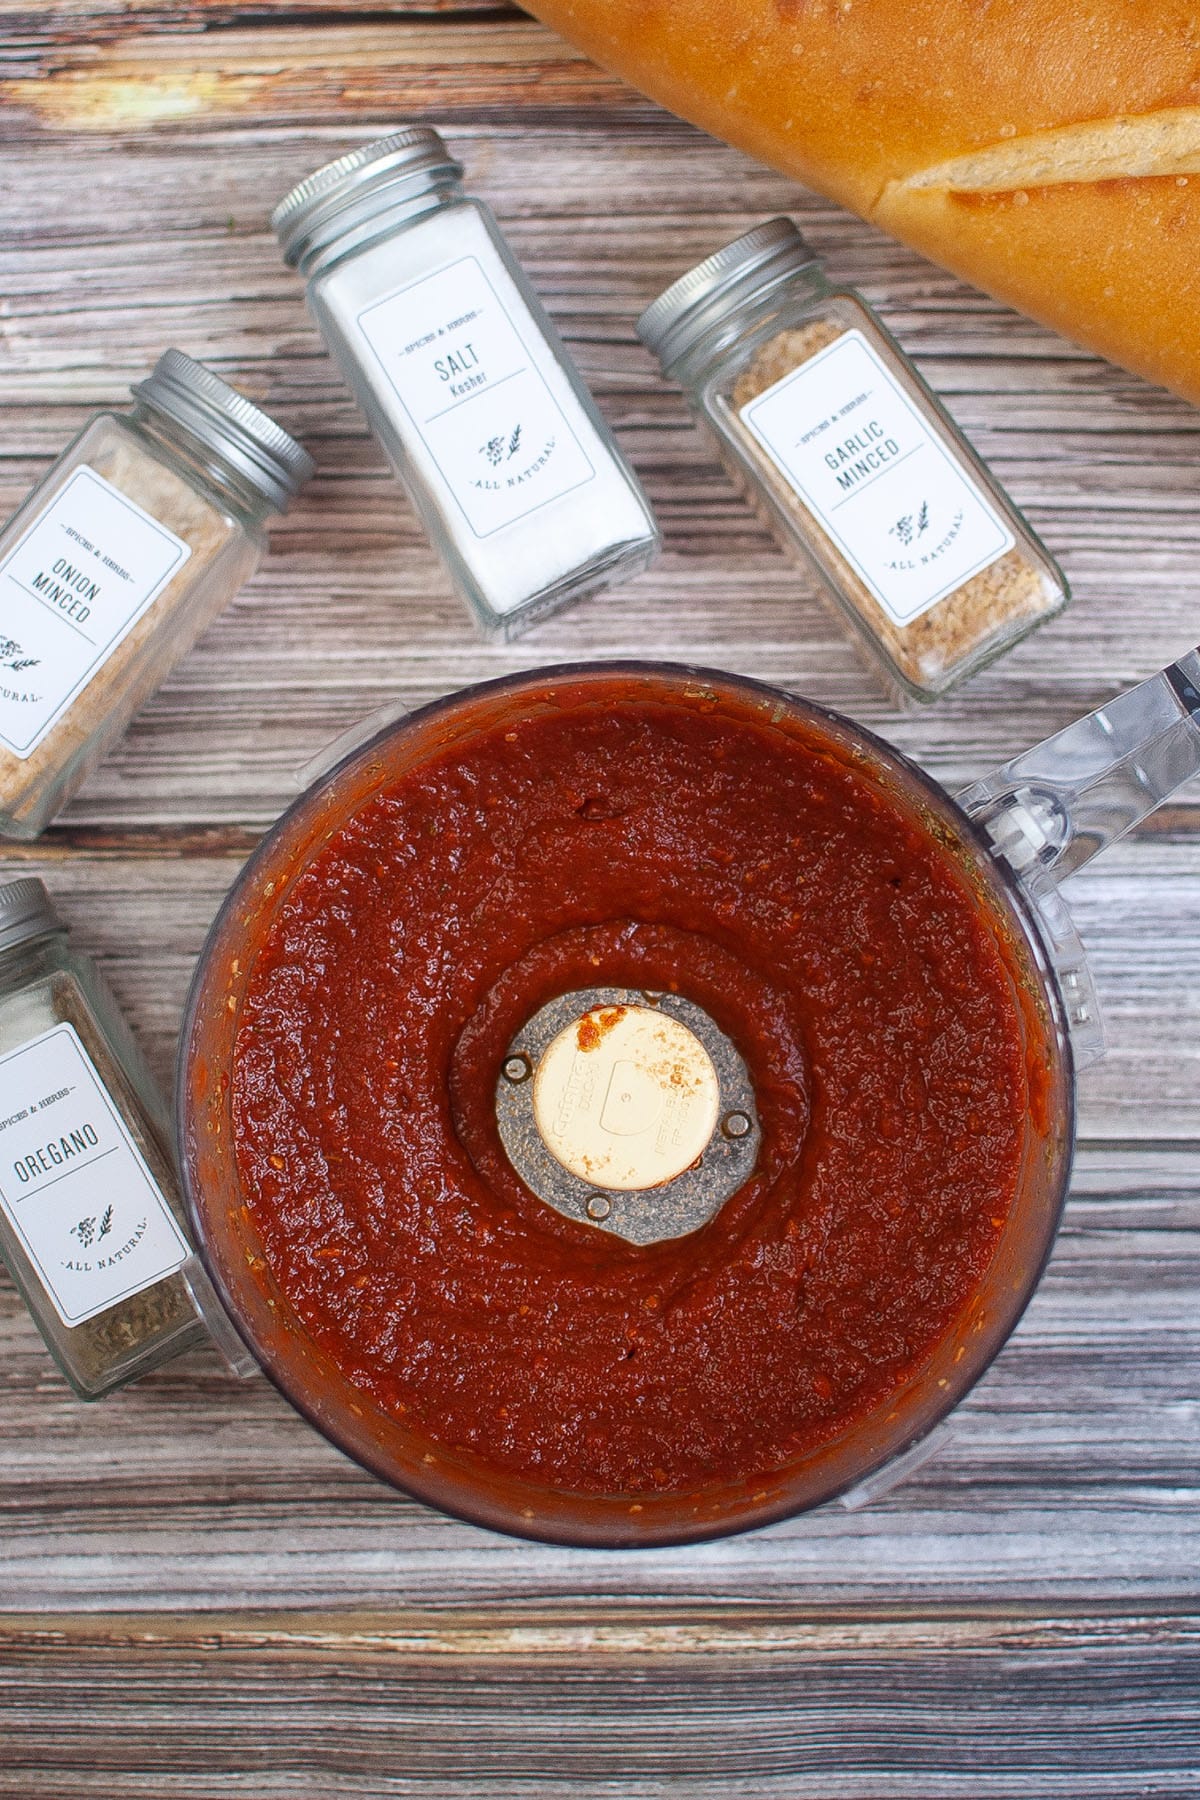 Blended tomato sauce and seasonings